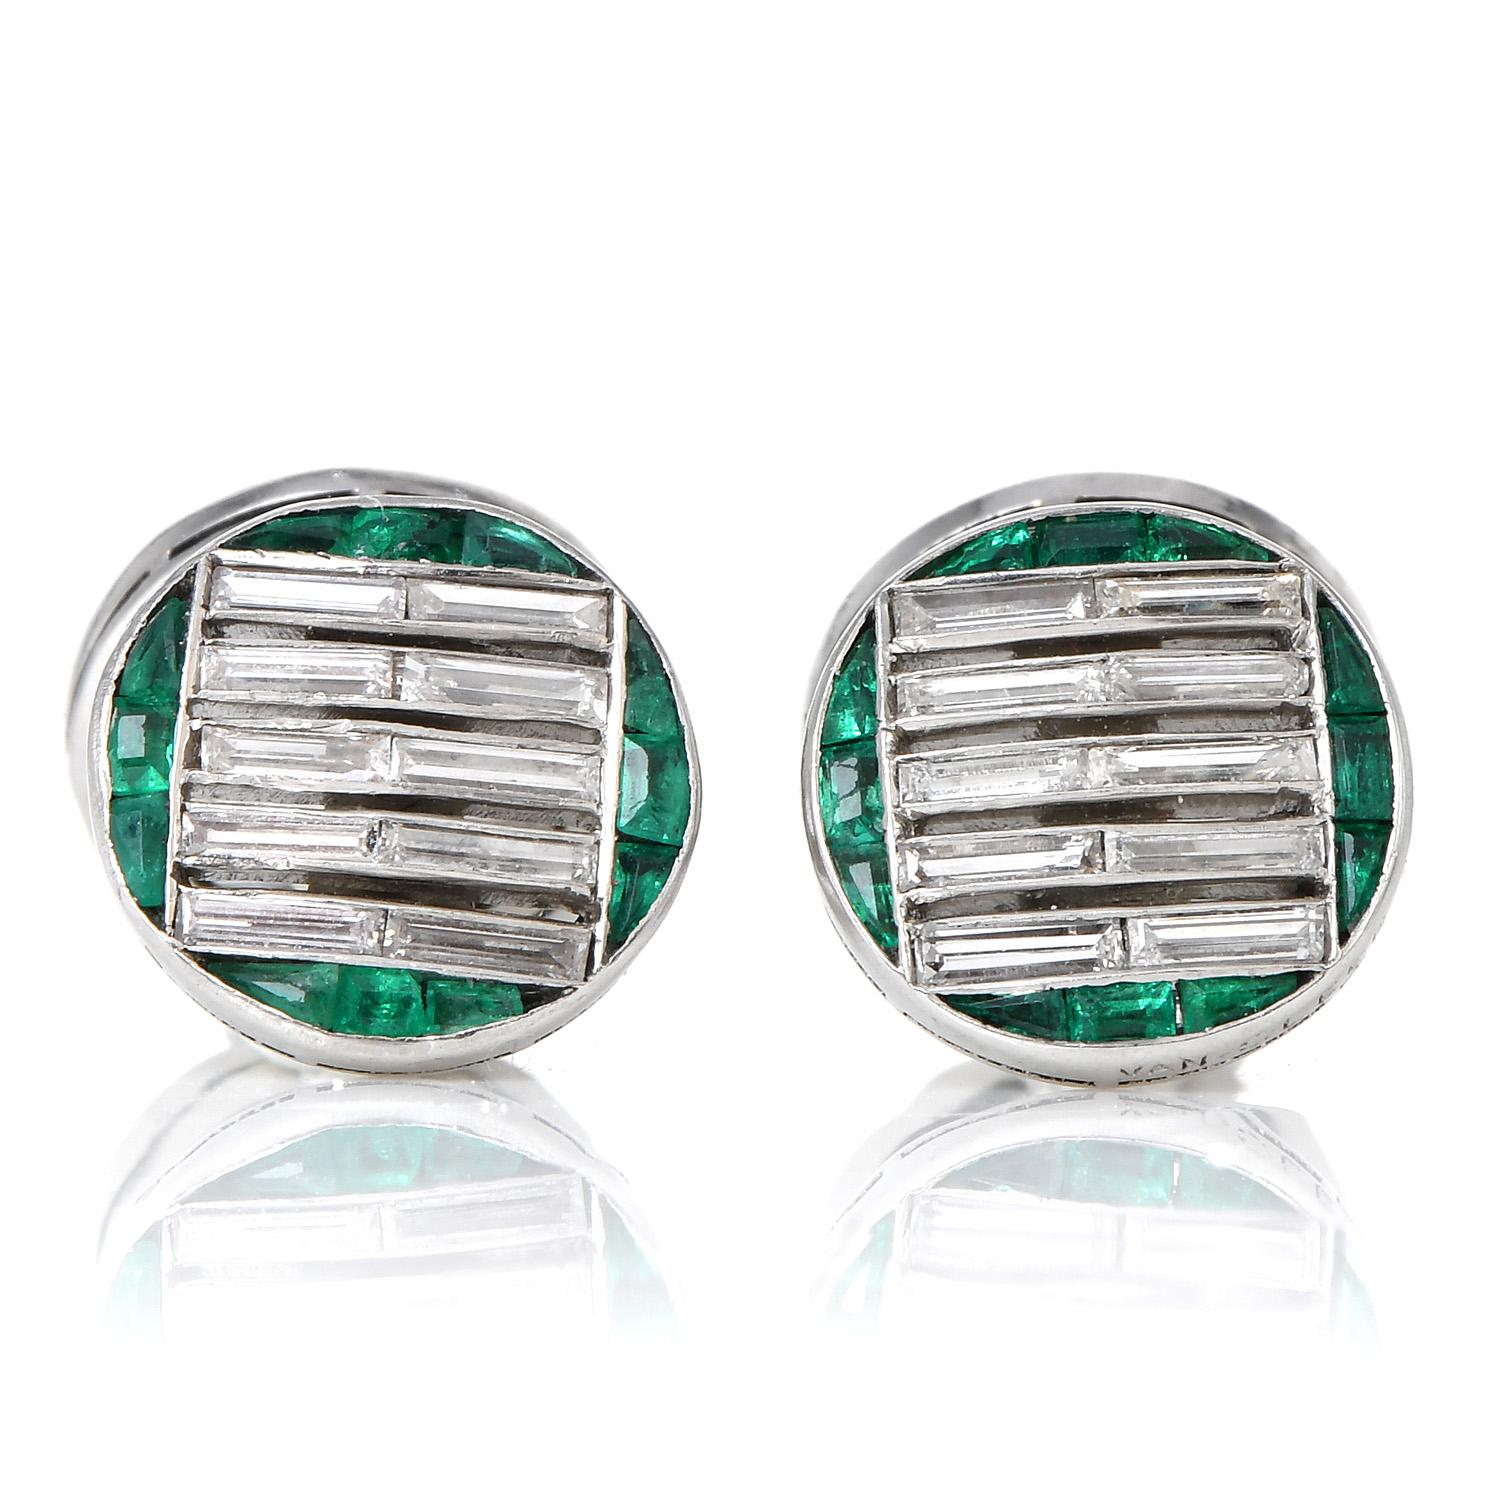 An Antique Art Deco piece from the House of Van Cleef & Arpels. 

Vie to relive the past in these Exquisite, circa 1940s cufflinks

Crafted in luxurious Platinum.  From the rounded shape to the geometrical

Patterned center, these cufflinks scream